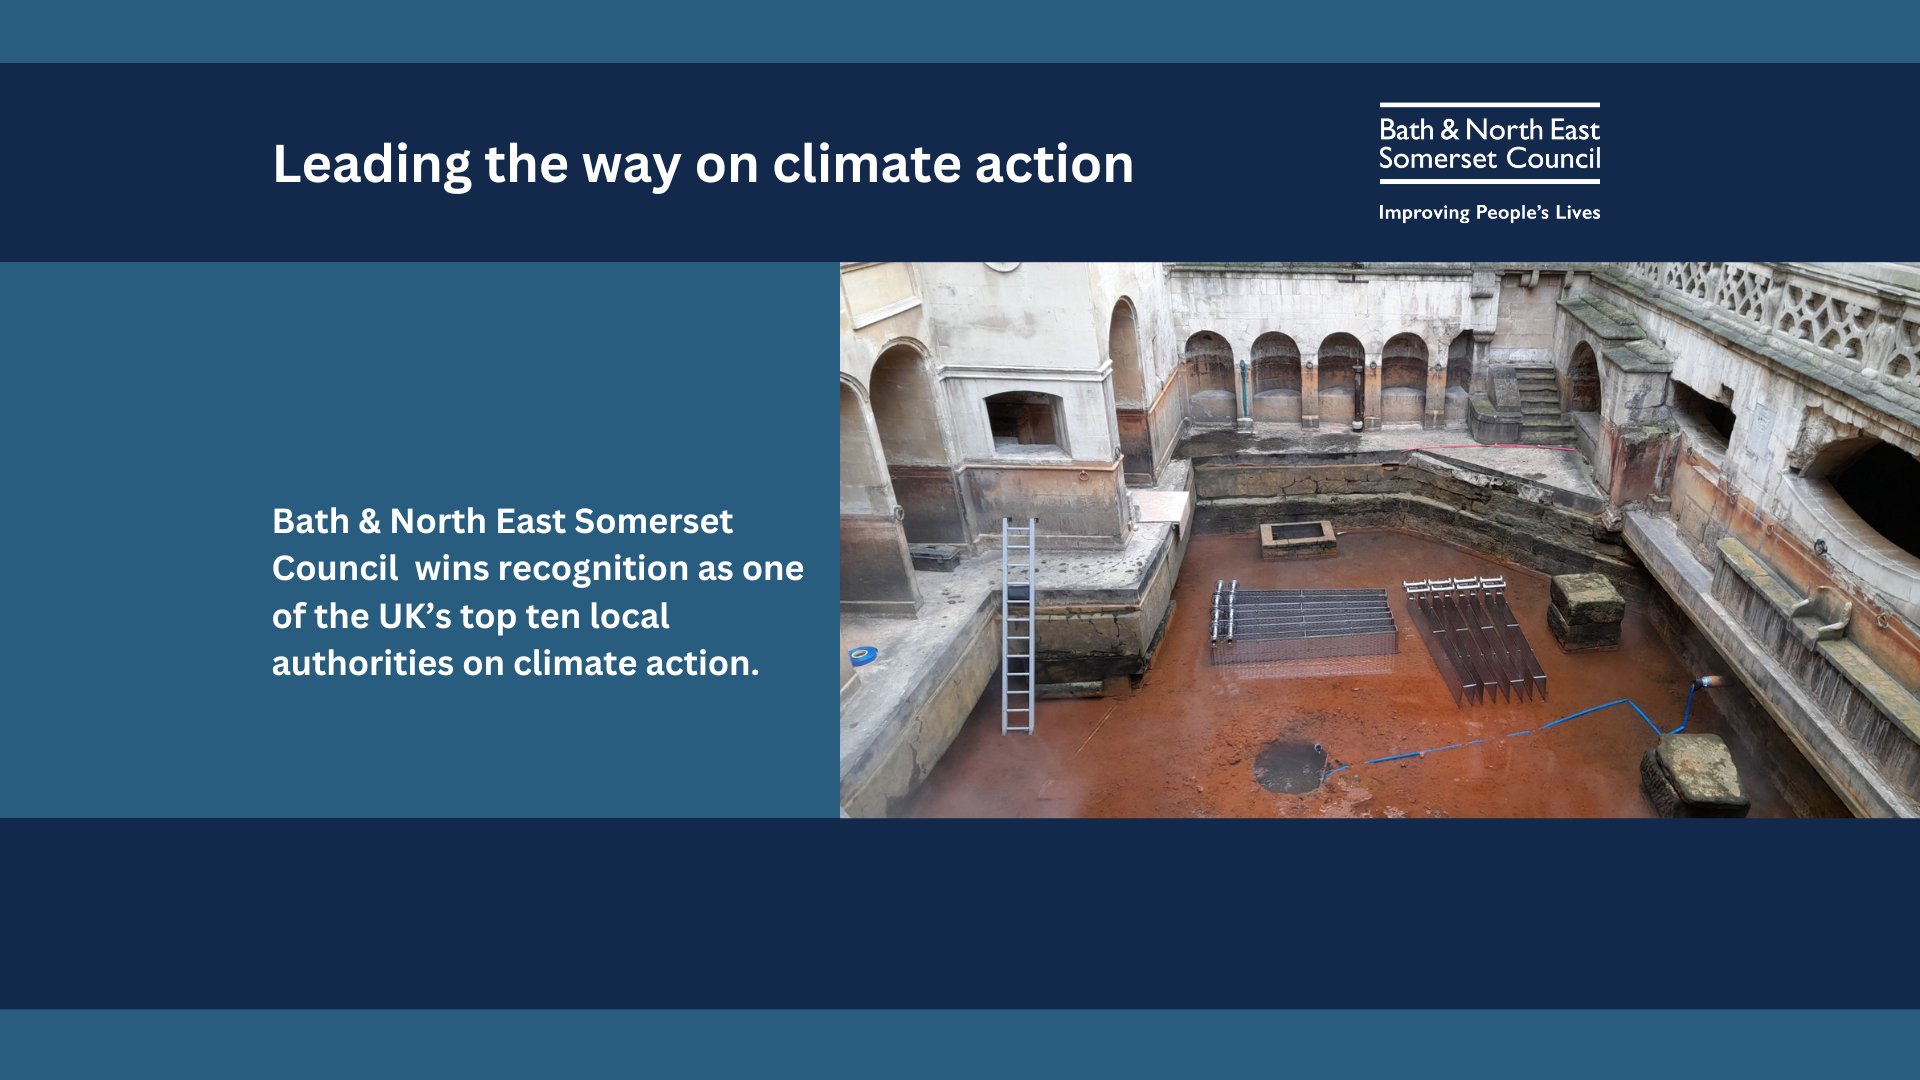 Text about success of council and a photograph showing the drained King's Bath and new energy exchange blades being installed